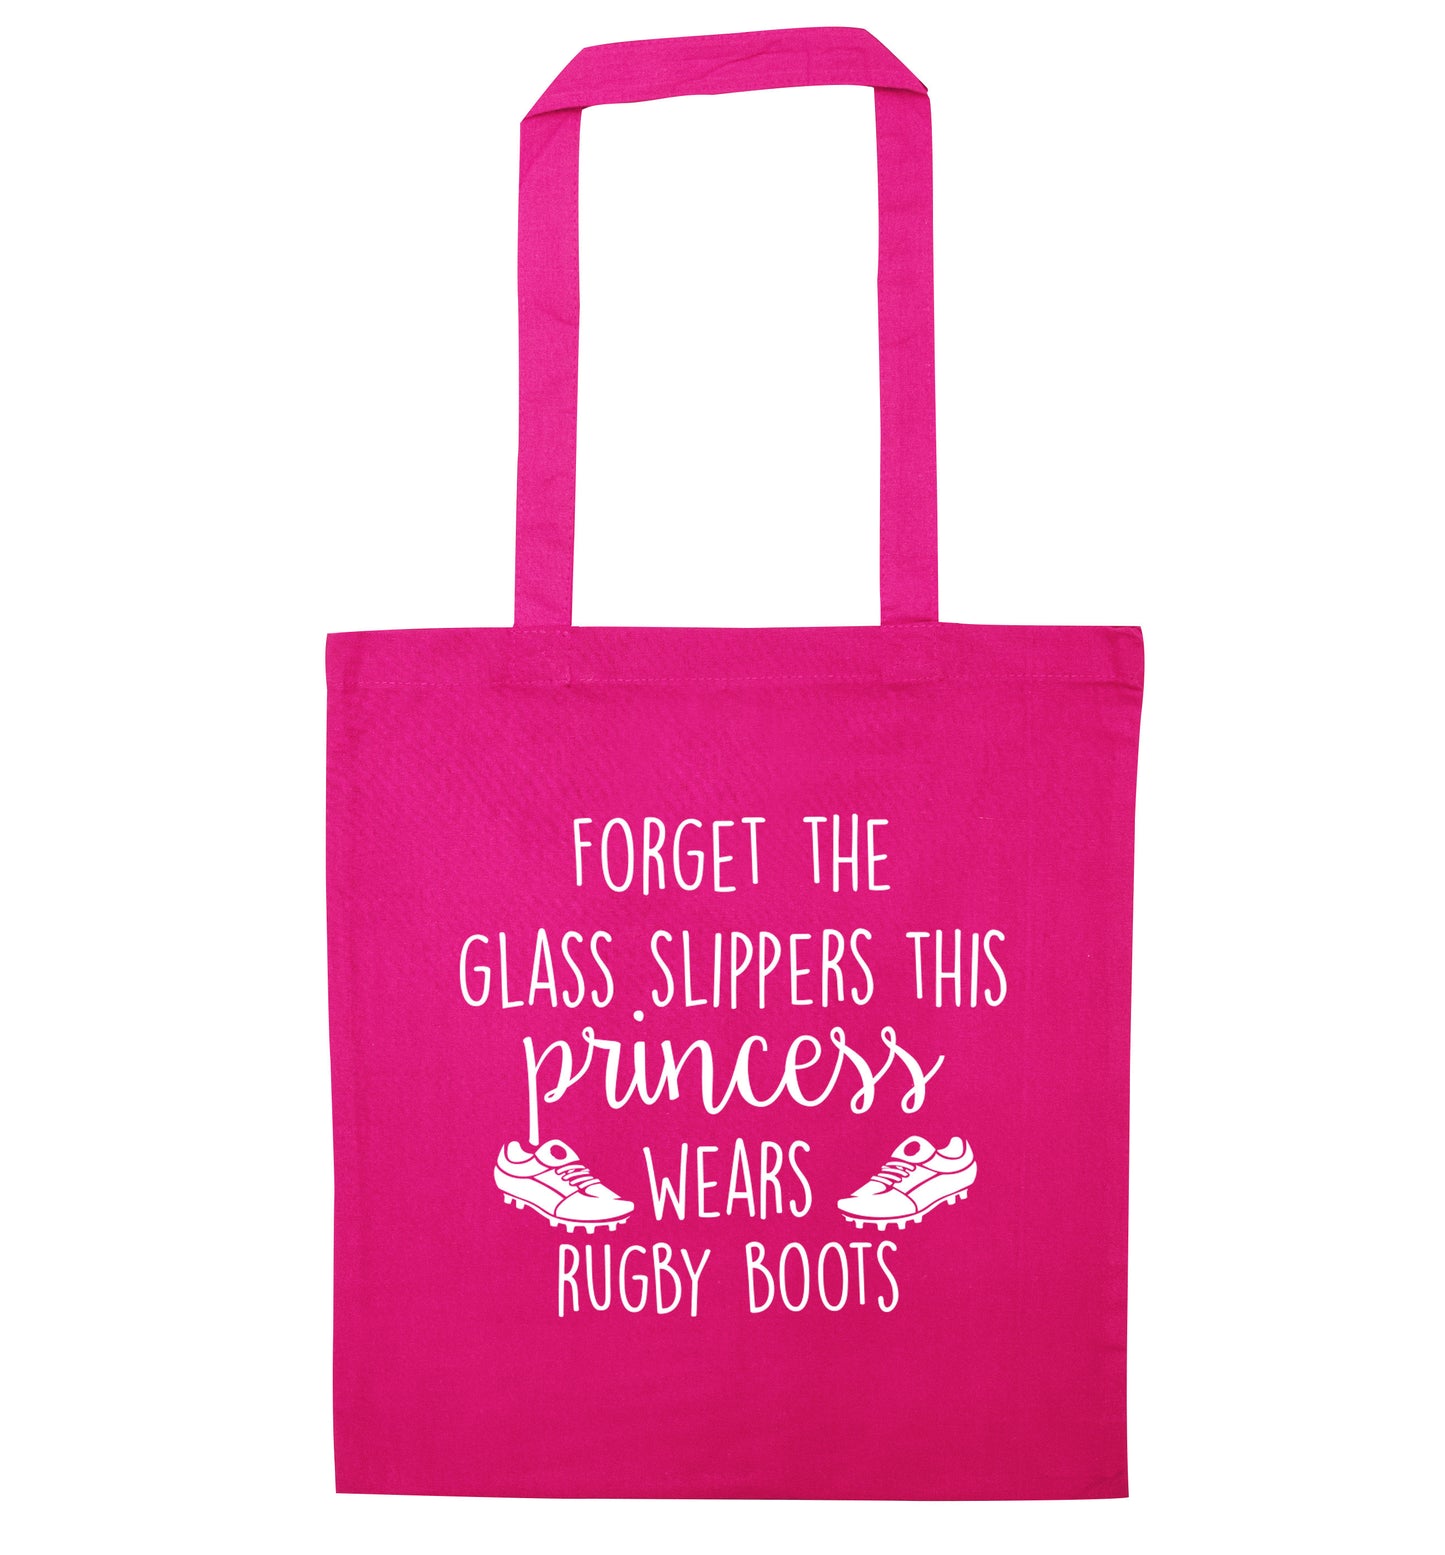 Forget the glass slippers this princess wears rugby boots pink tote bag